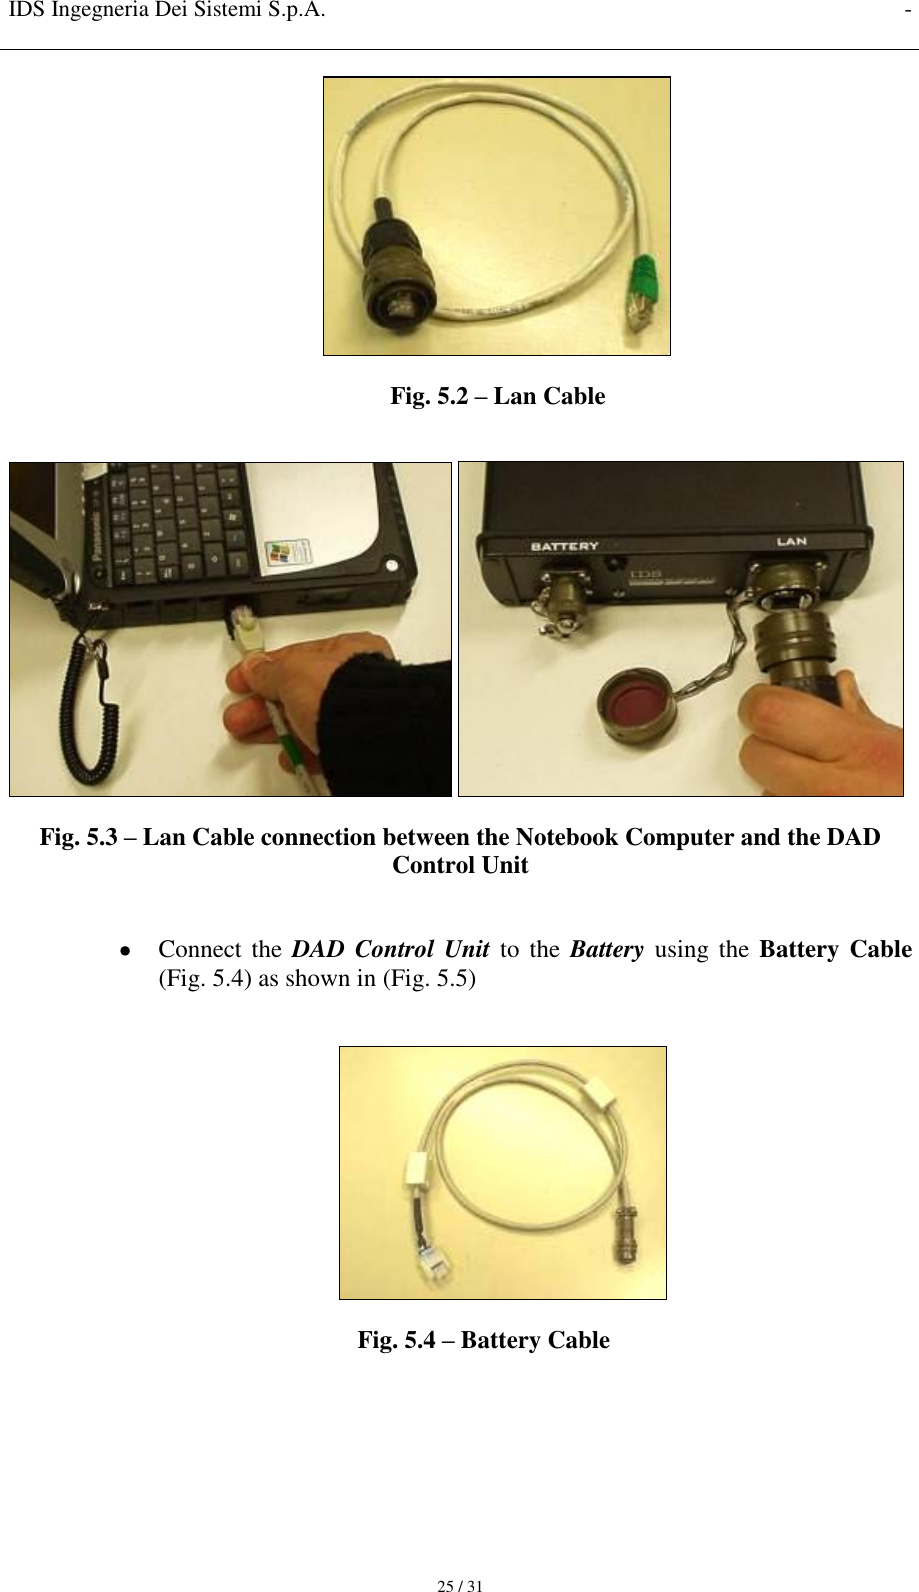 IDS Ingegneria Dei Sistemi S.p.A. -     25 / 31  Fig. 5.2 – Lan Cable     Fig. 5.3 – Lan Cable connection between the Notebook Computer and the DAD Control Unit    Connect the  DAD Control Unit to  the Battery using  the  Battery Cable  (Fig. 5.4) as shown in (Fig. 5.5)   Fig. 5.4 – Battery Cable  